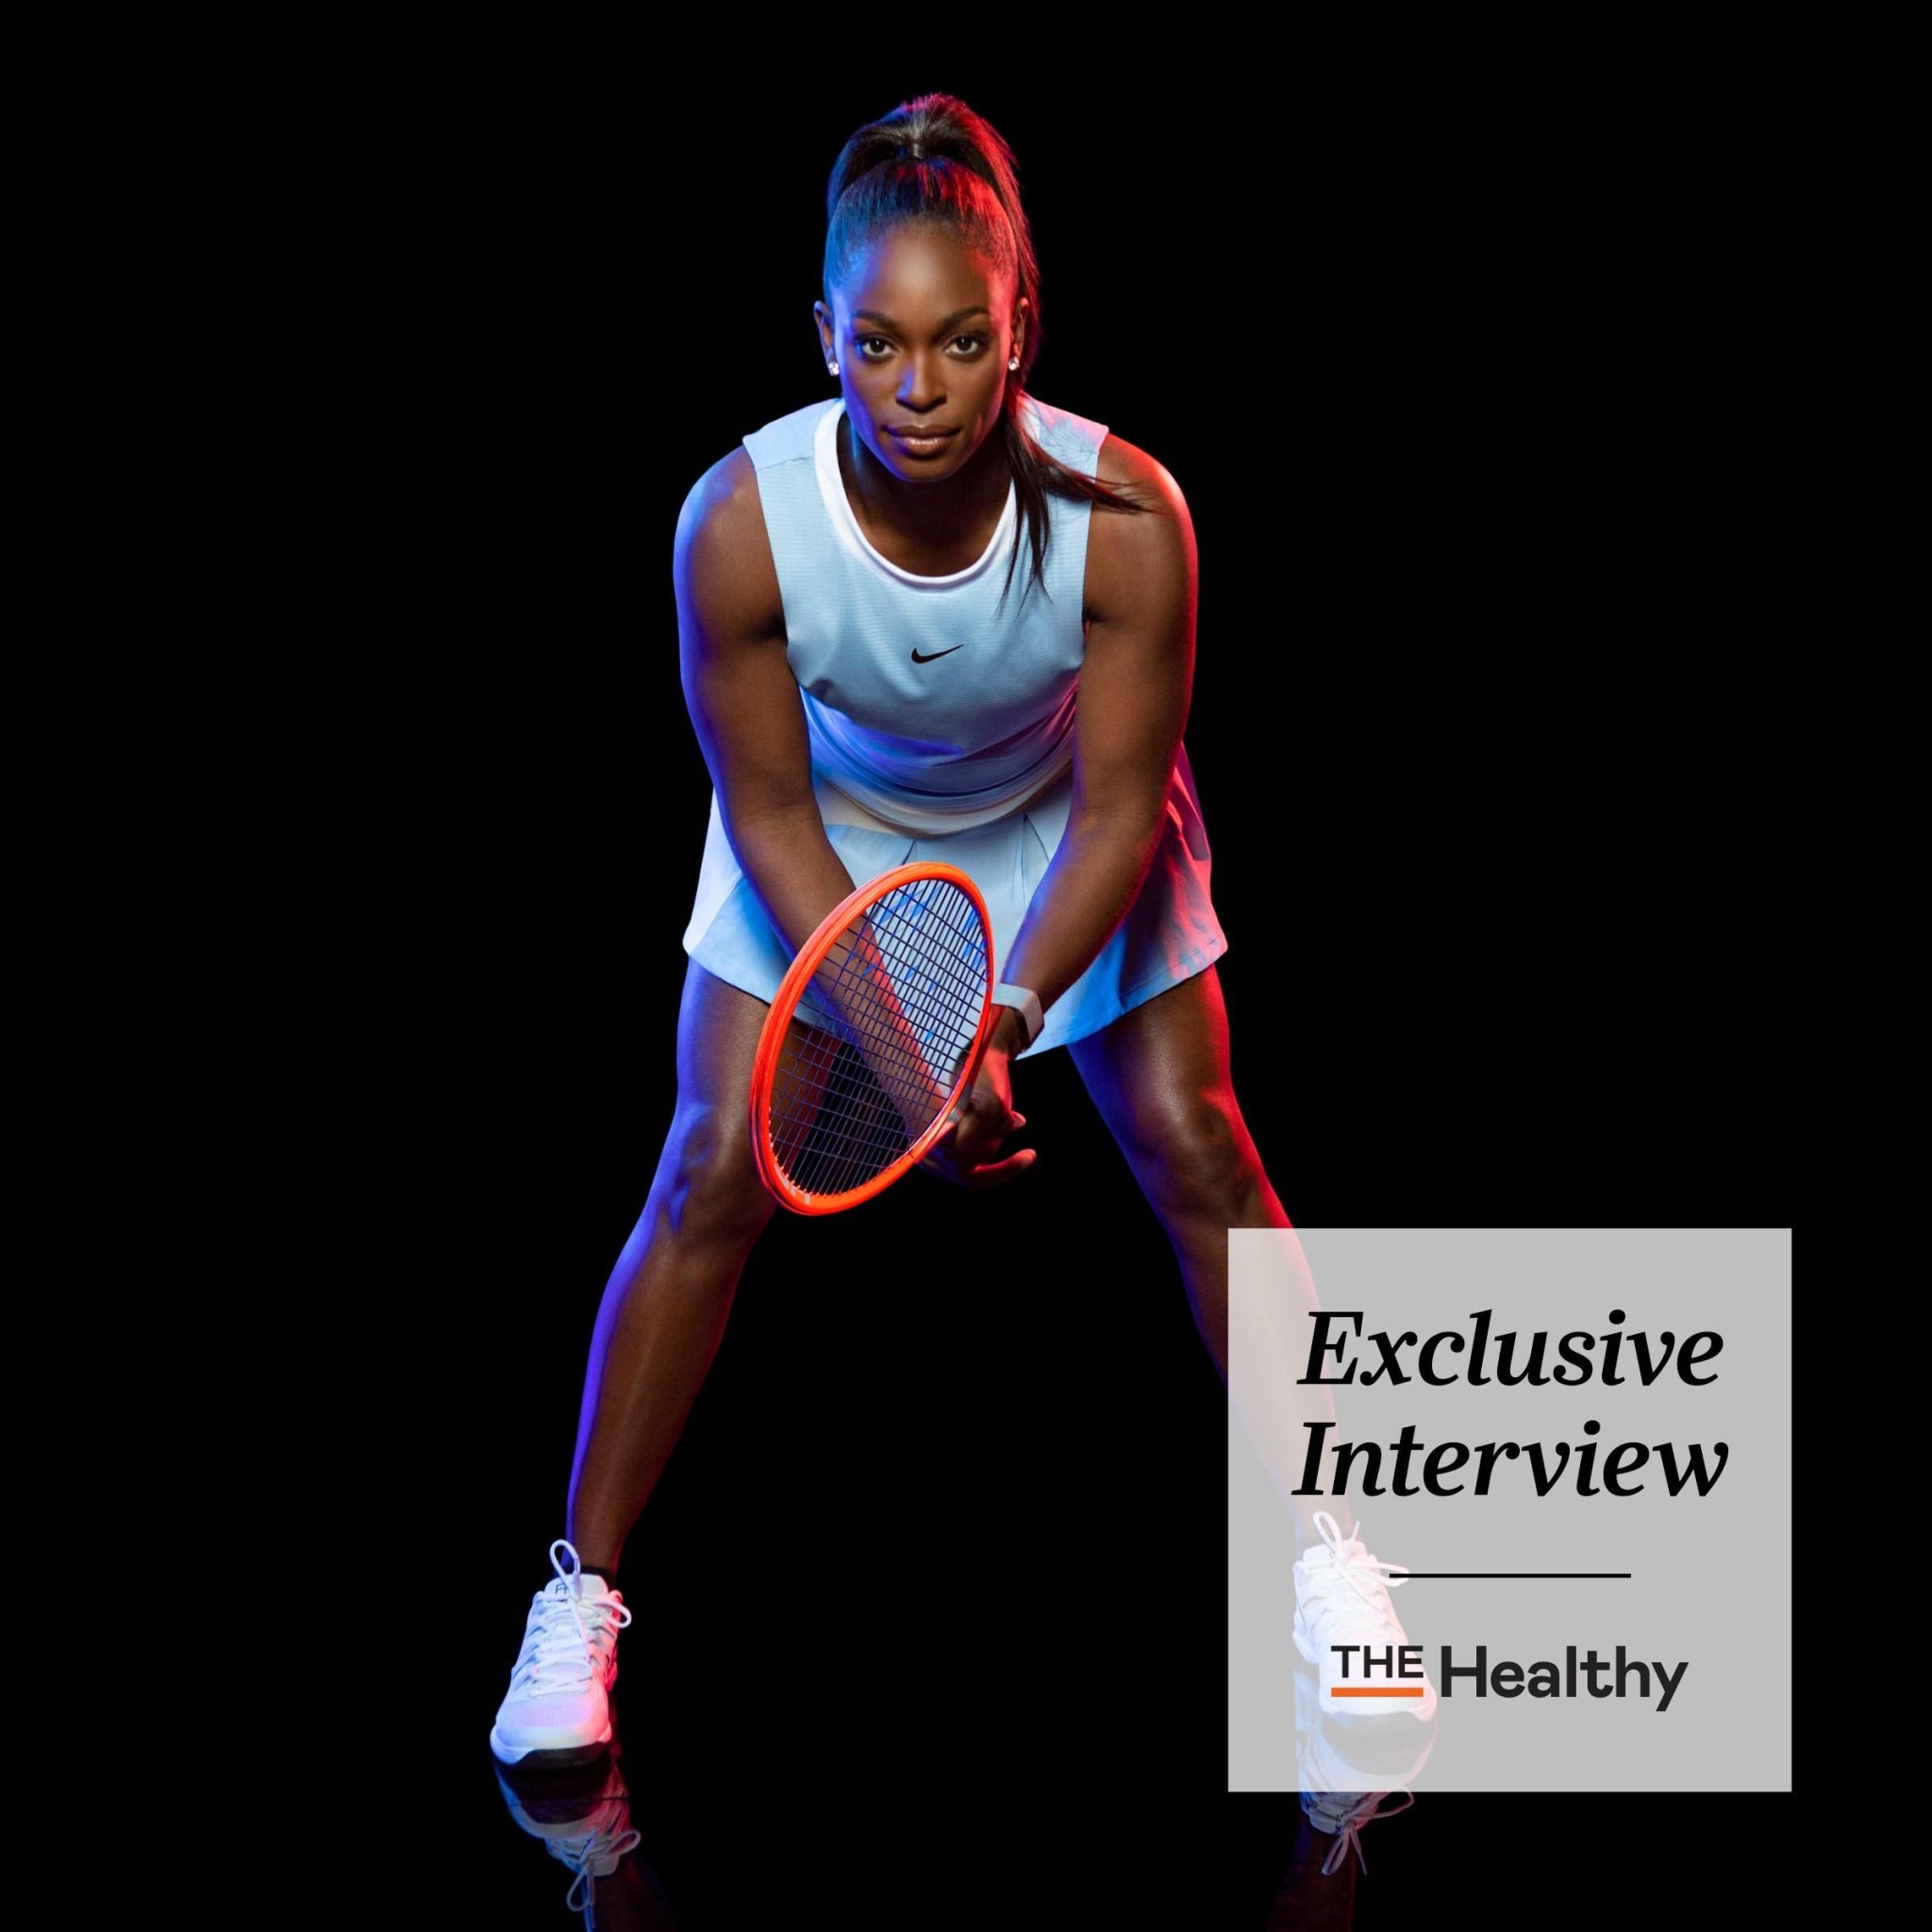 Tennis Pro Sloane Stephens on Staying Positive and ‘Growing the Game’ Ahead of Wimbledon 2022